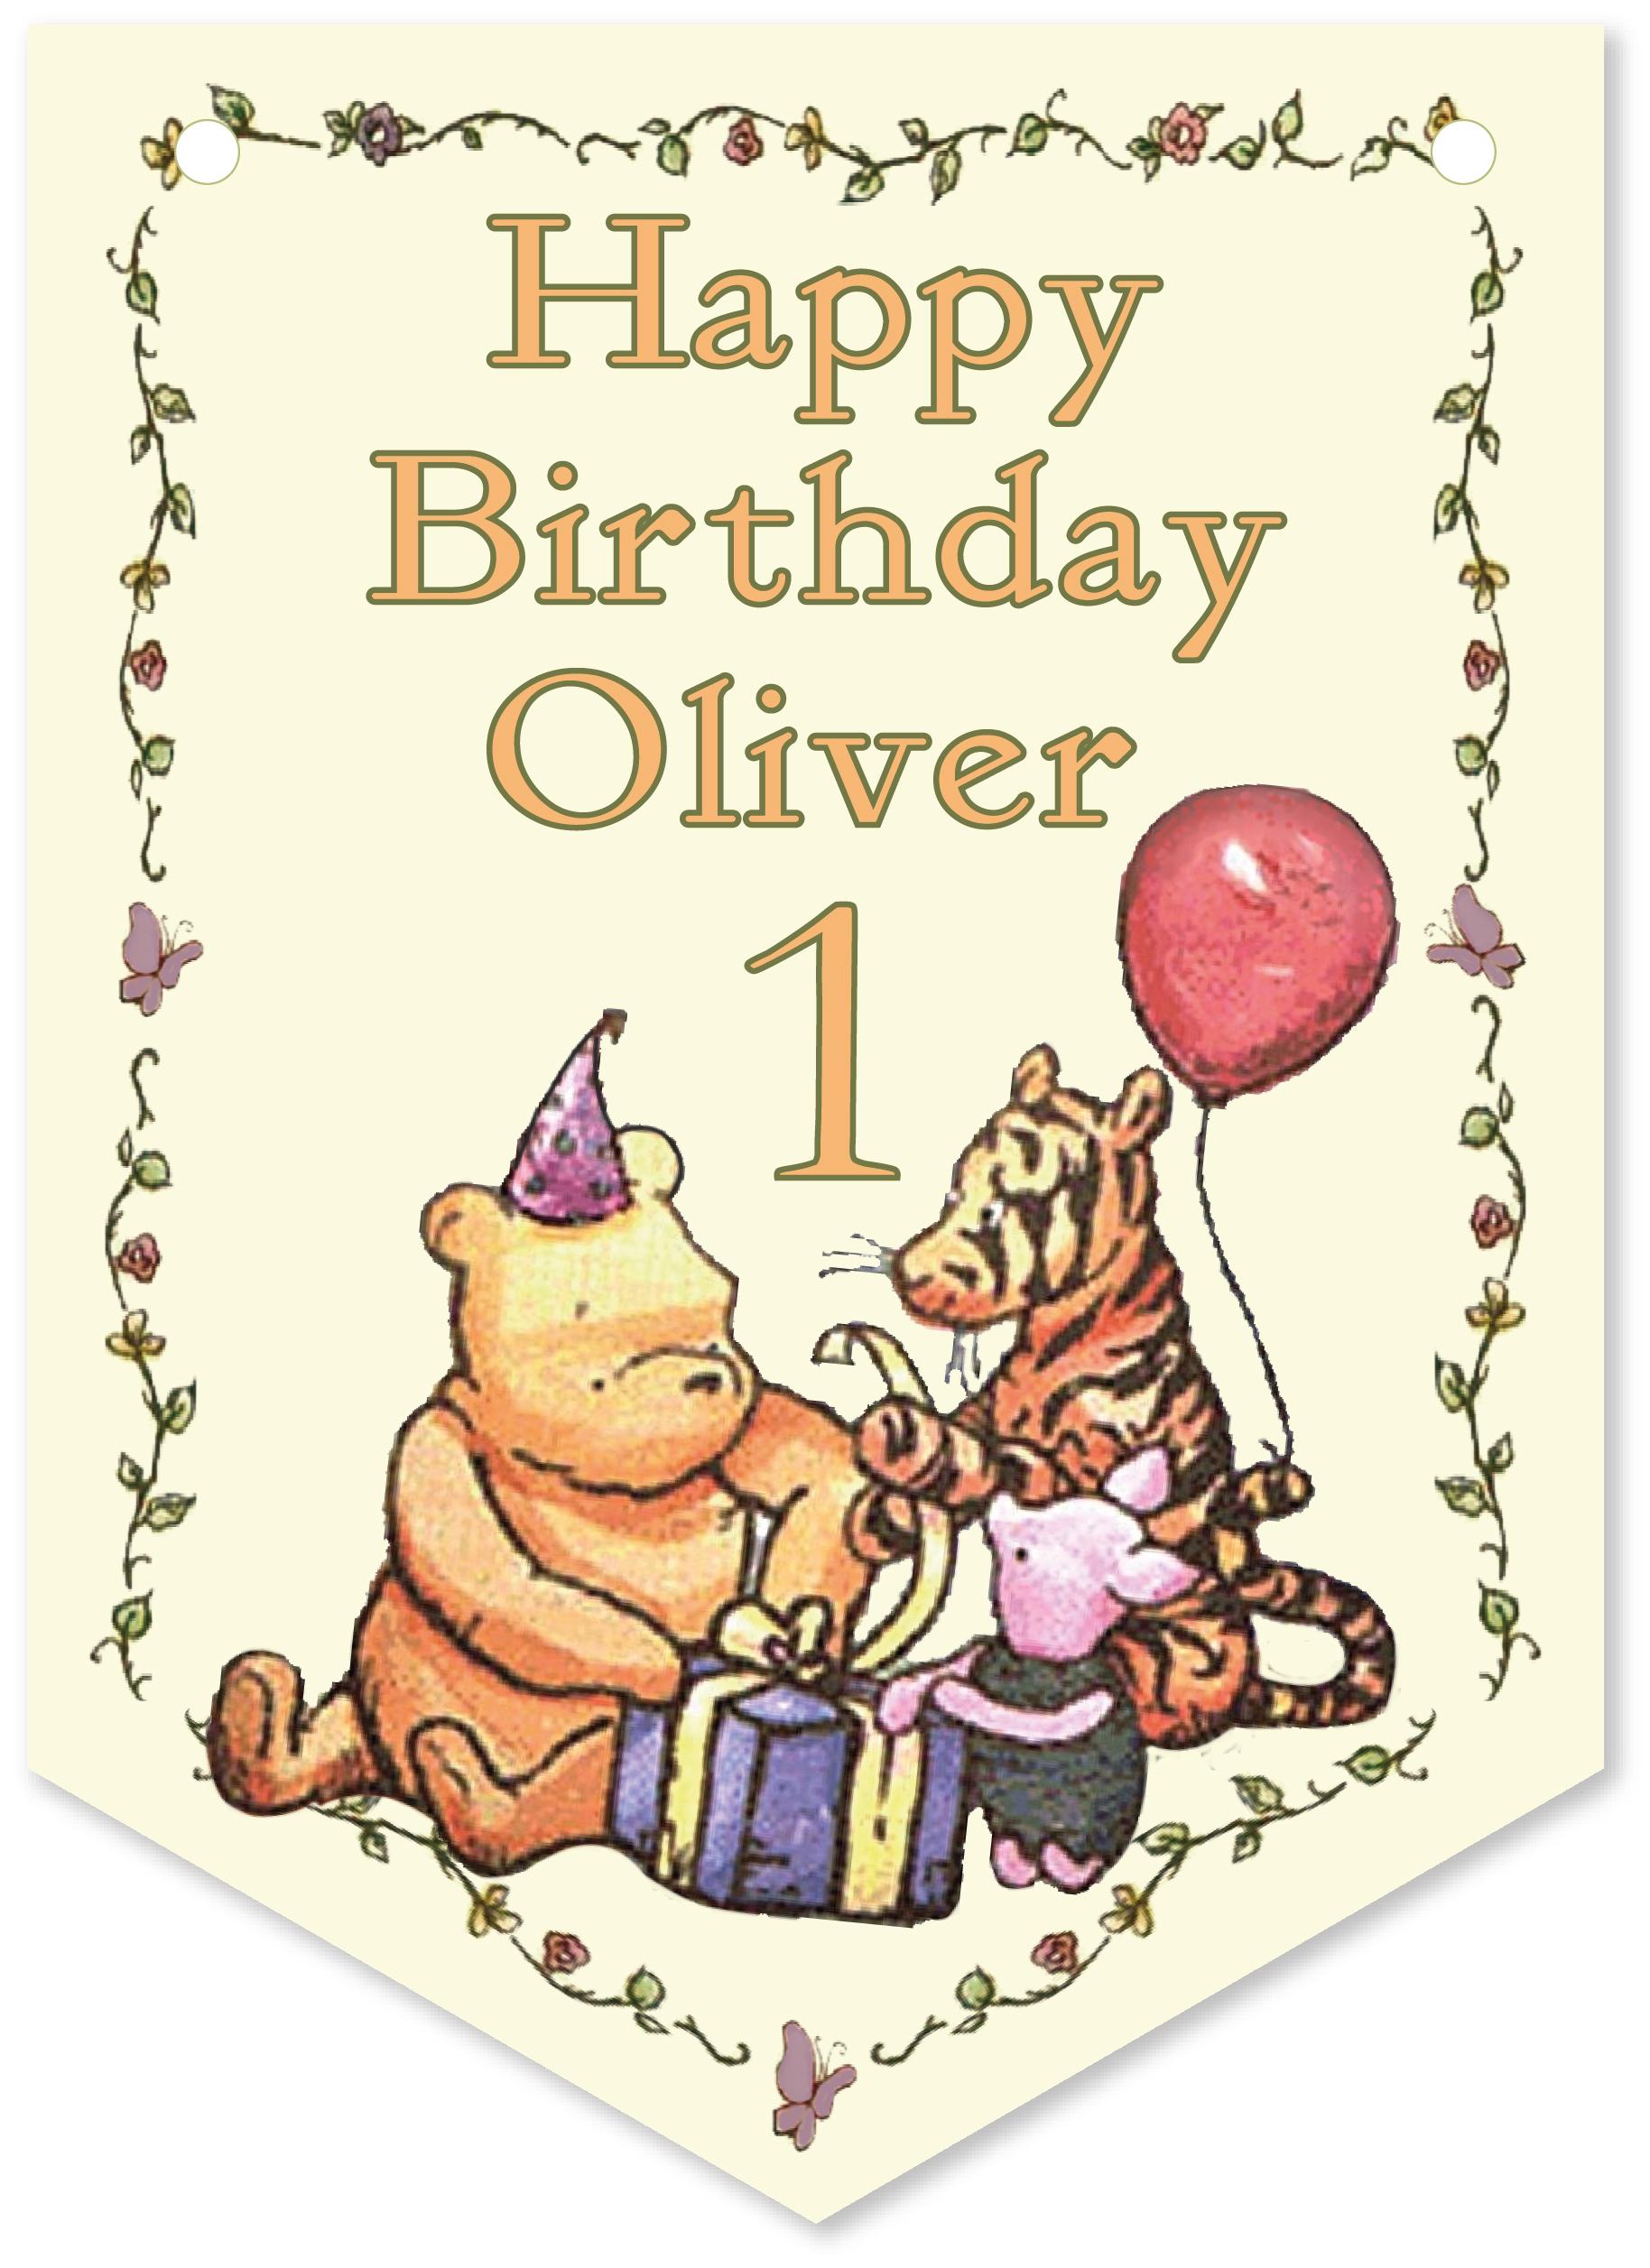 Winnie the pooh personalised birthday banner,birthday party decoration